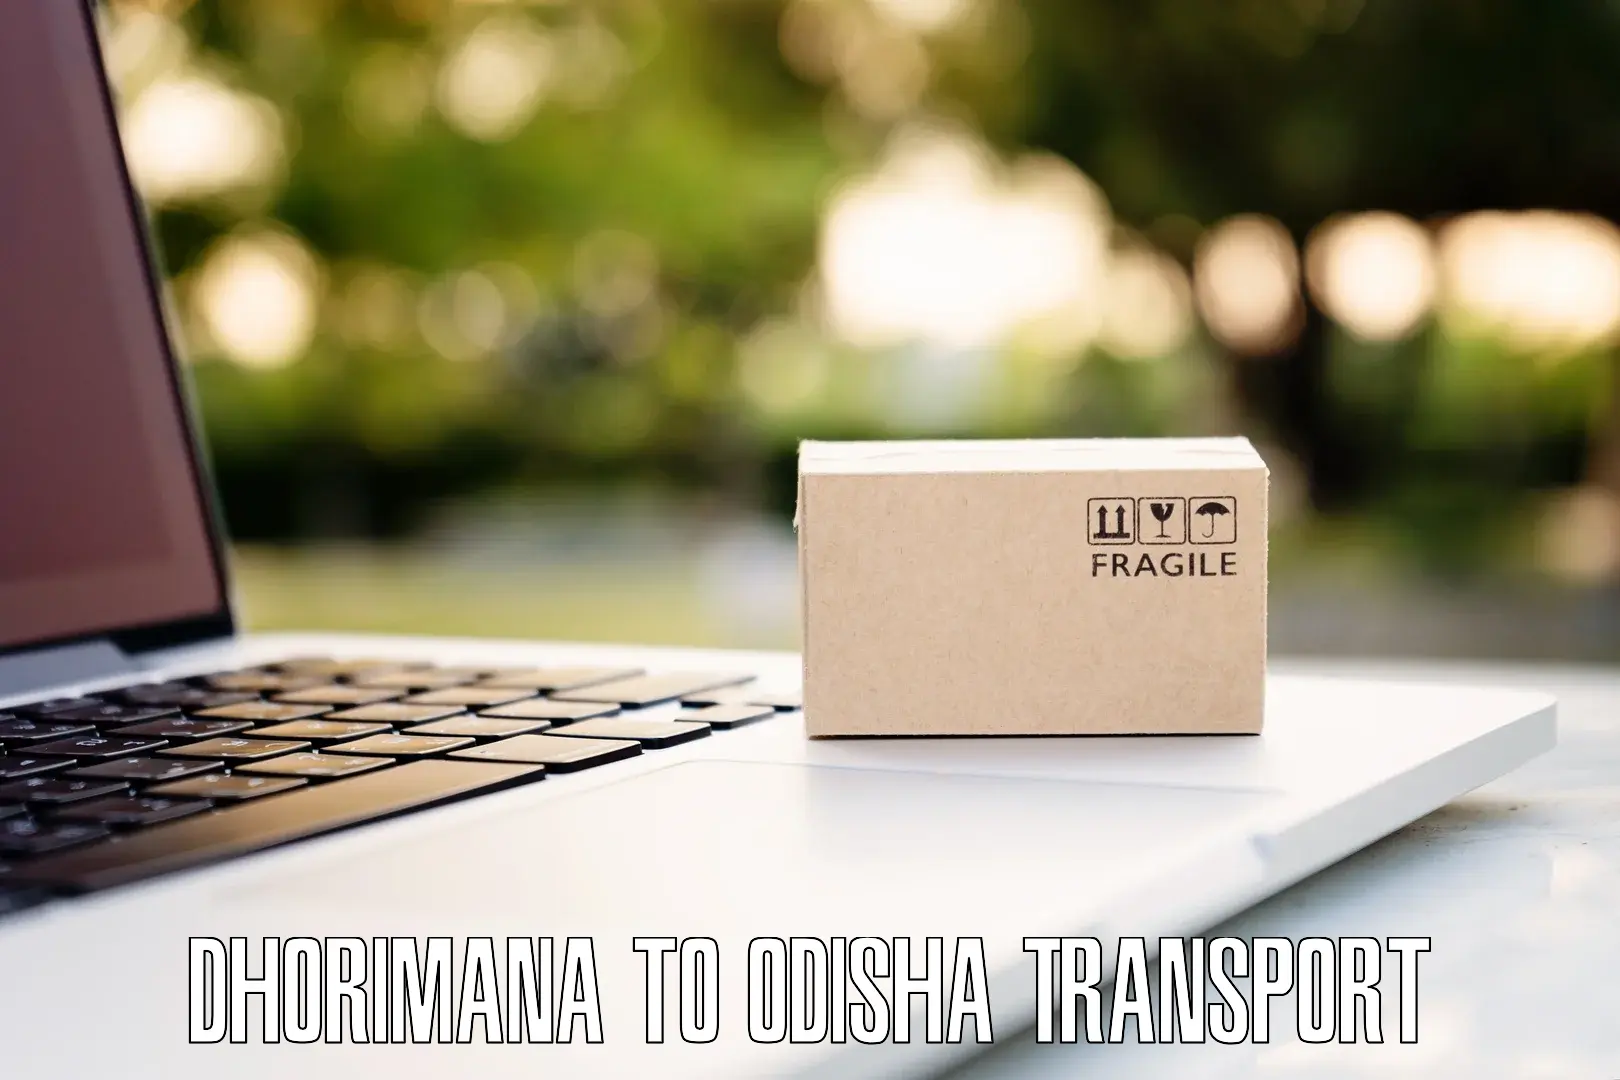 Road transport online services Dhorimana to Chikiti